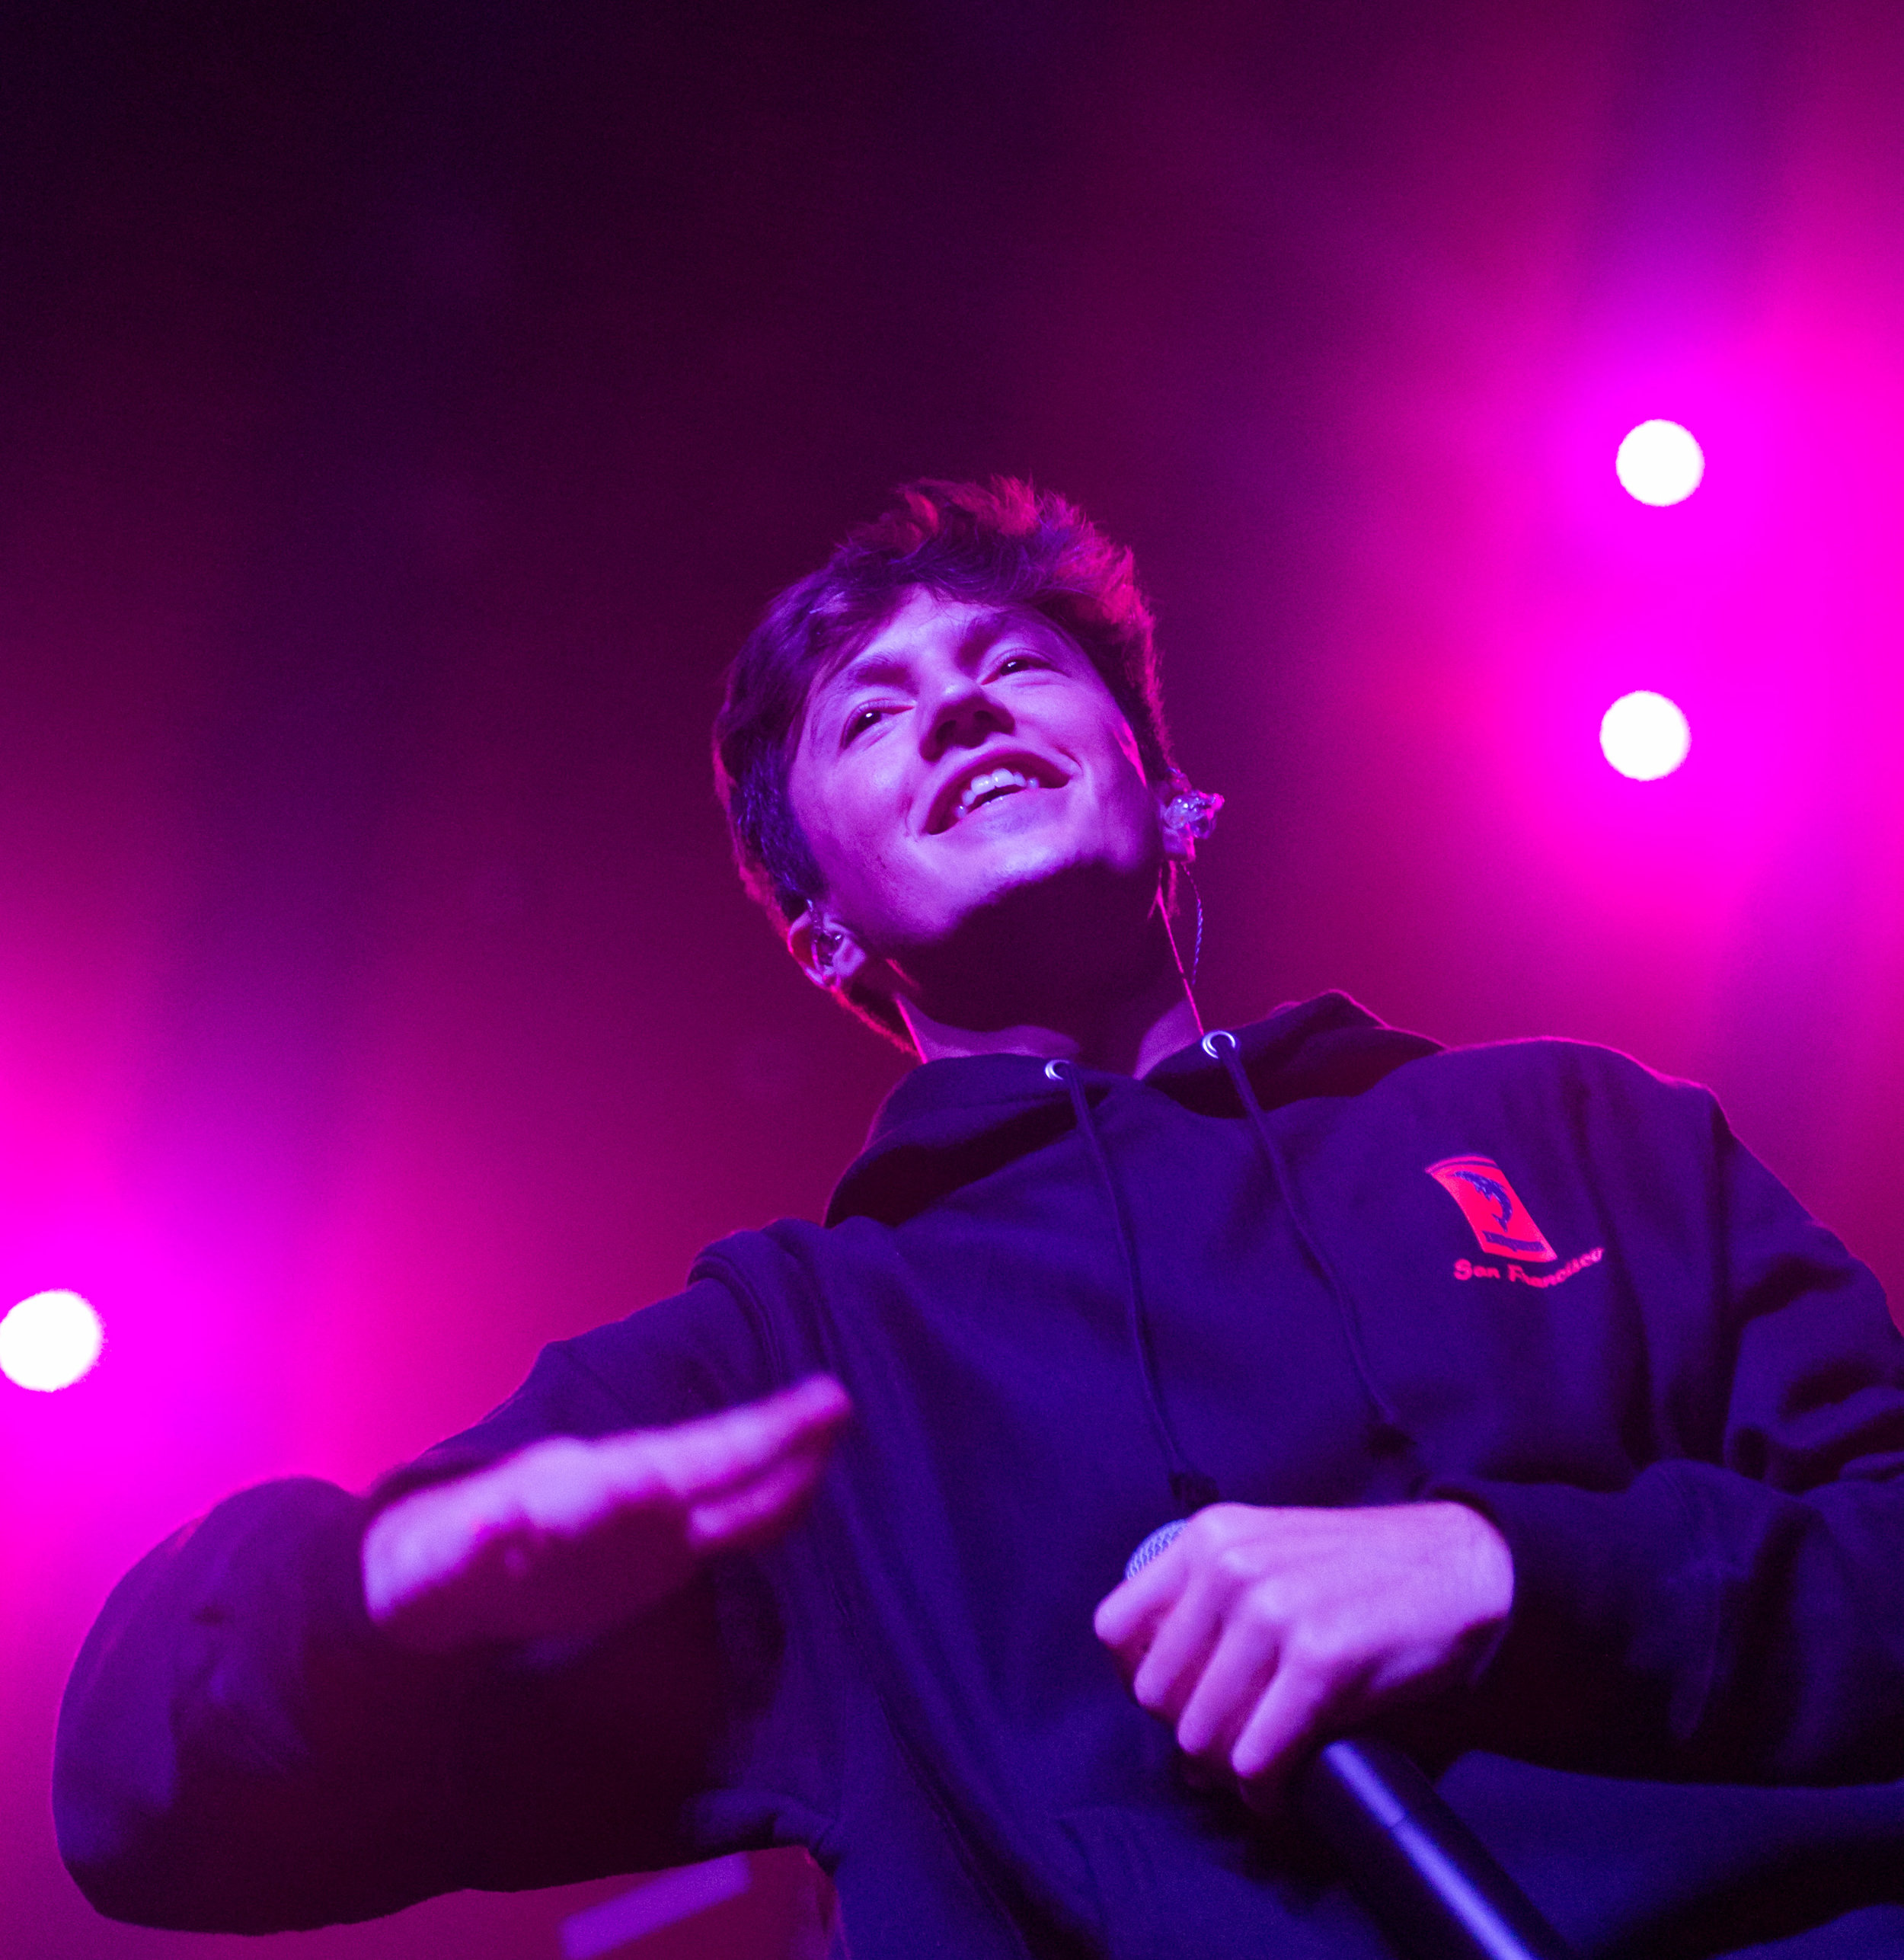  Rapper and singer Myles Parrish dances on stage to his song "Notification" as the opening act for Luke Christopher and Hoodie Allen during Hoodie Allen's "The Hype" tour named after his new album at The Fonda Theatre in Los Angeles, Calif on Monday,